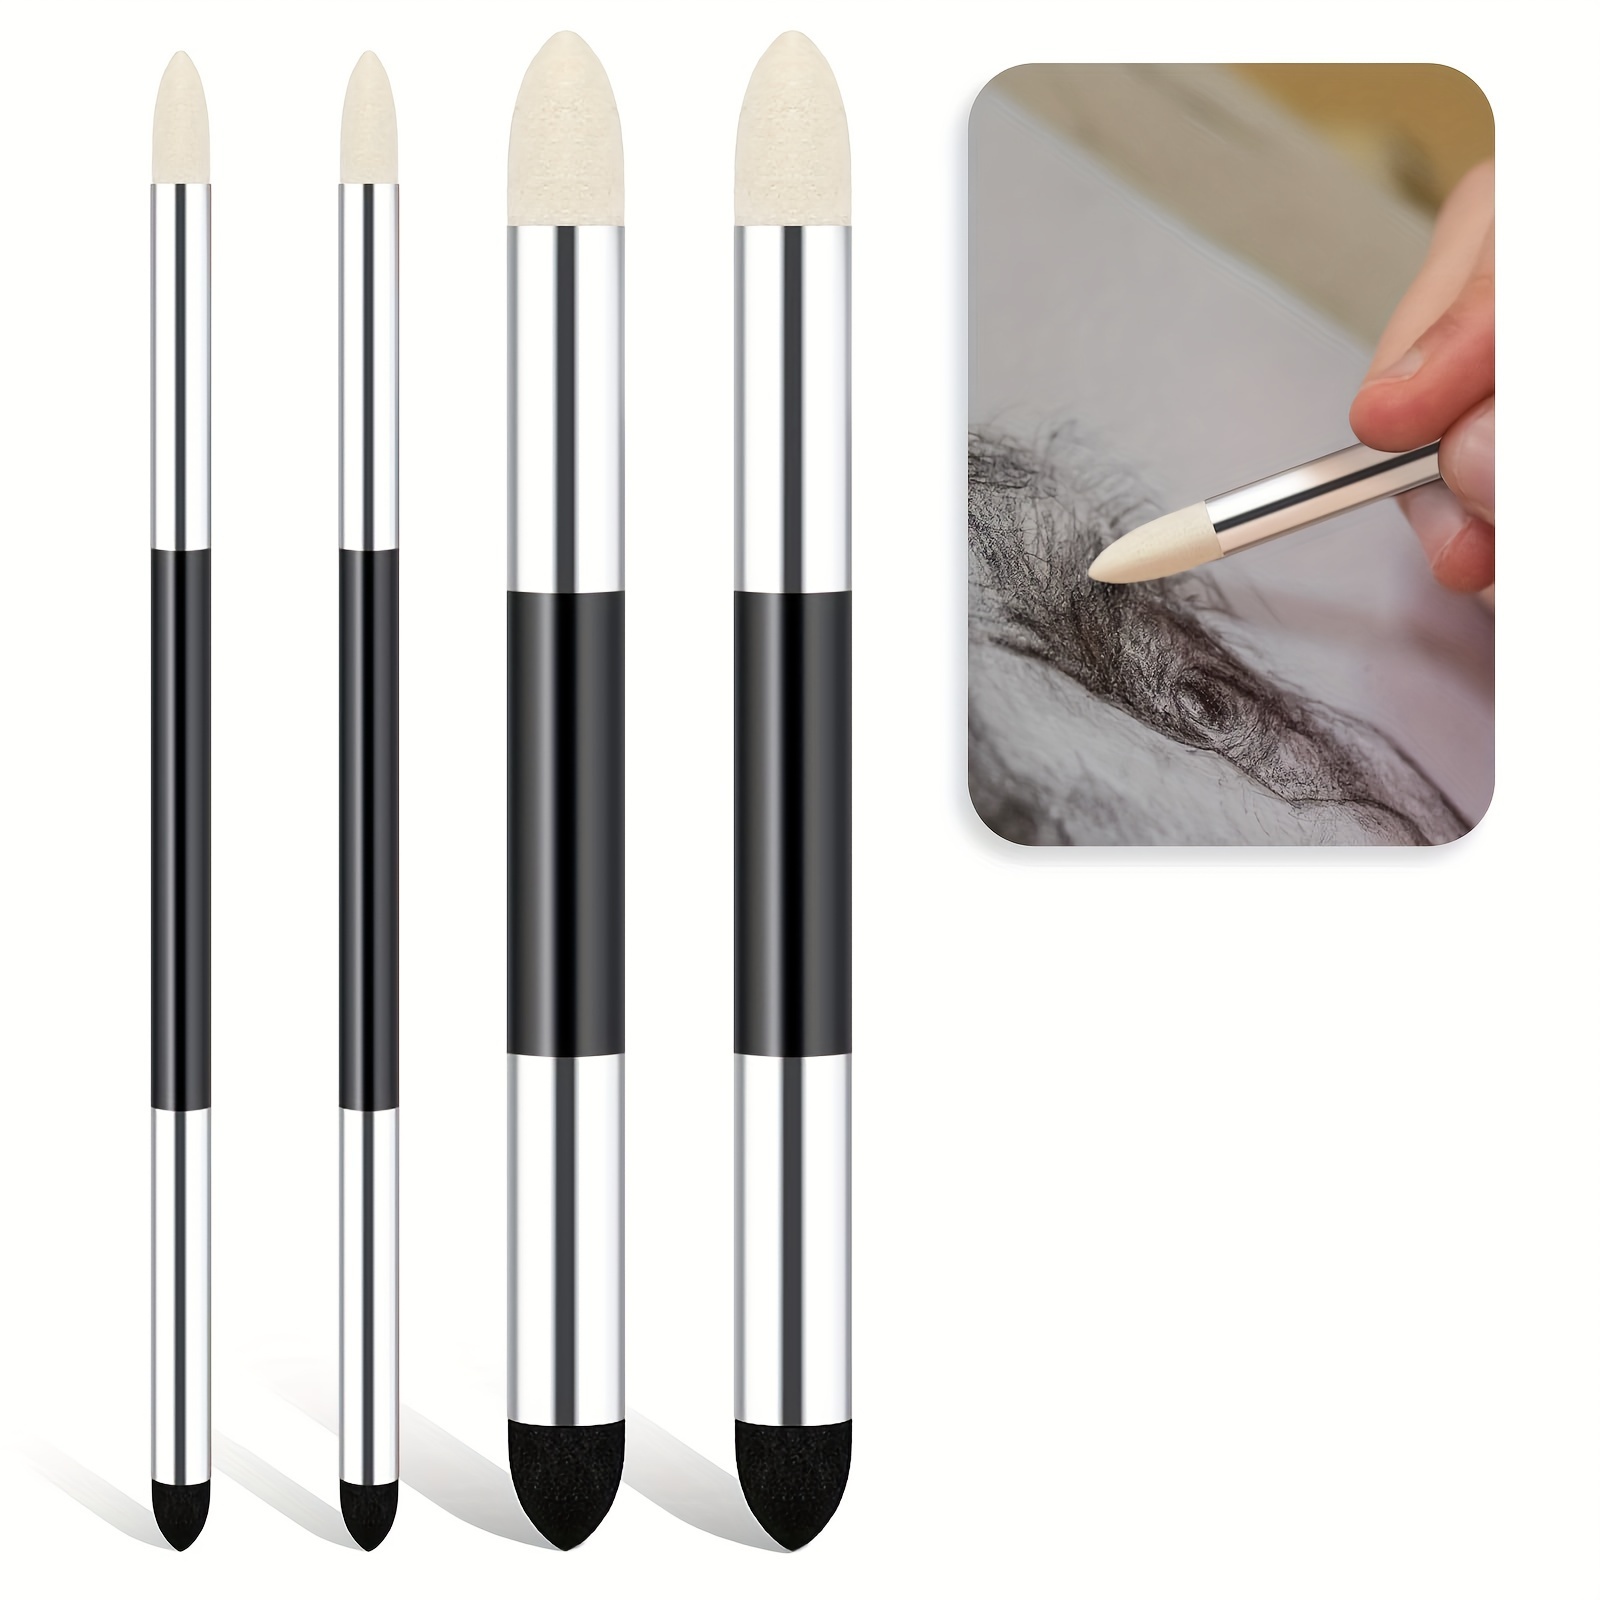 

4pcs Dual-headed Sketch Blending Pens - Round Foam Paintbrushes With Sponge And Felt Tips For Artists, Reusable And Washable Drawing Tools For School And Professional Use